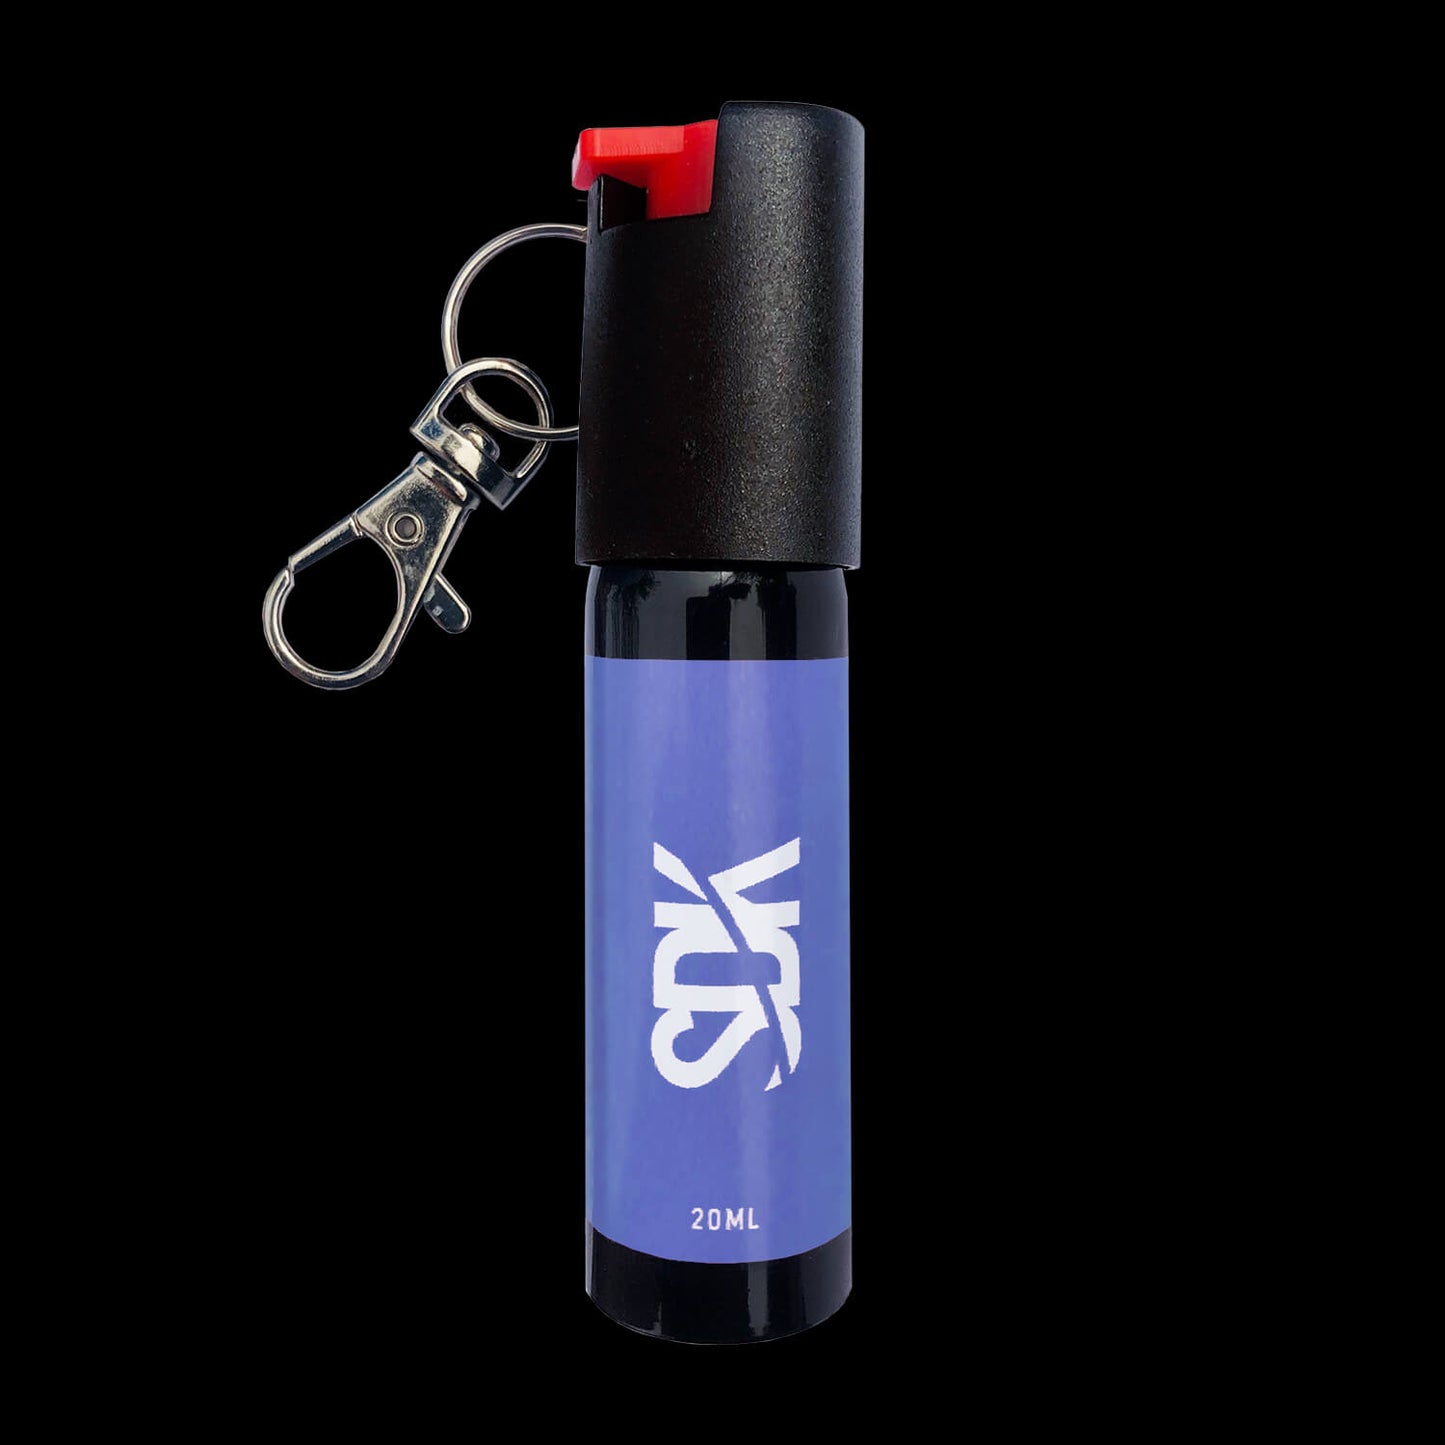 SDK Kit Blue Pepper Spray (20ml compact Pepper Spray with keychain attachment)